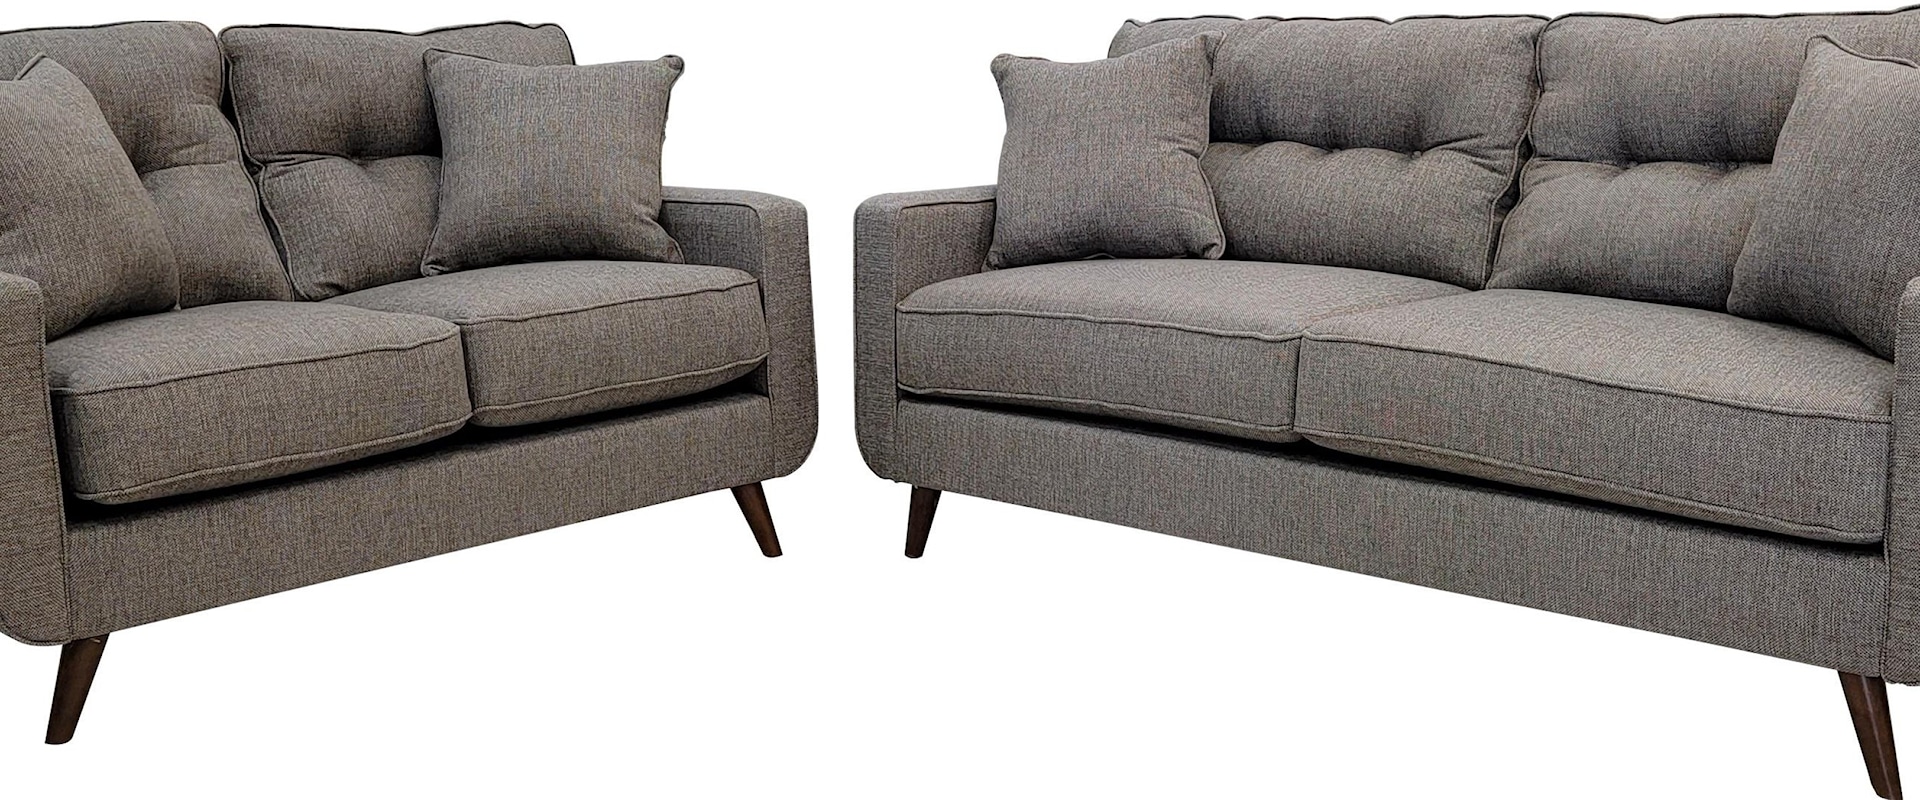 Sofa and Loveseat Homecoming Mineral